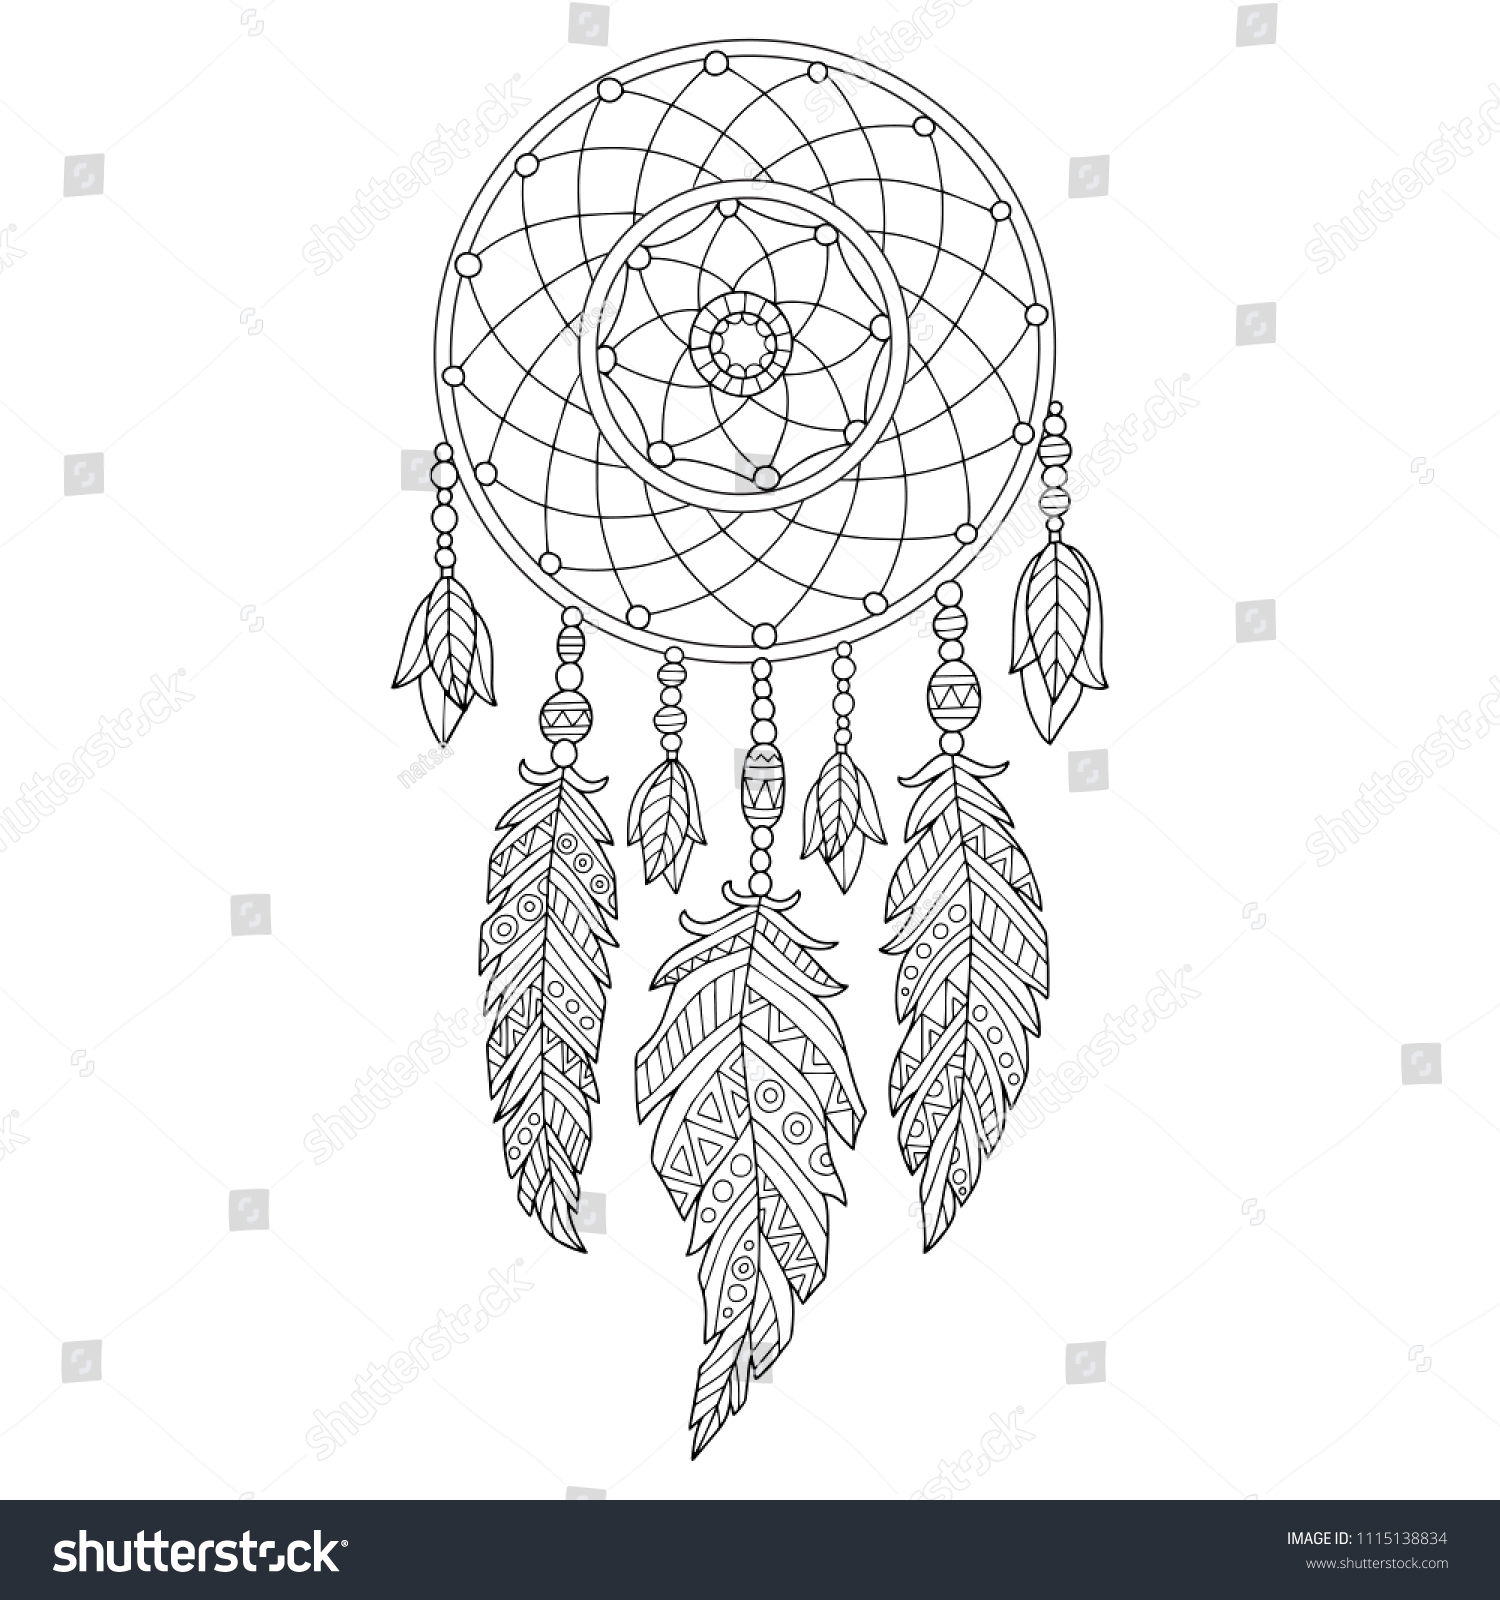 SVG of Detailed vector illustration of the dreamcatcher, isolated in white. Perfect for coloring book, page for adults and children or for a tattoo design. svg